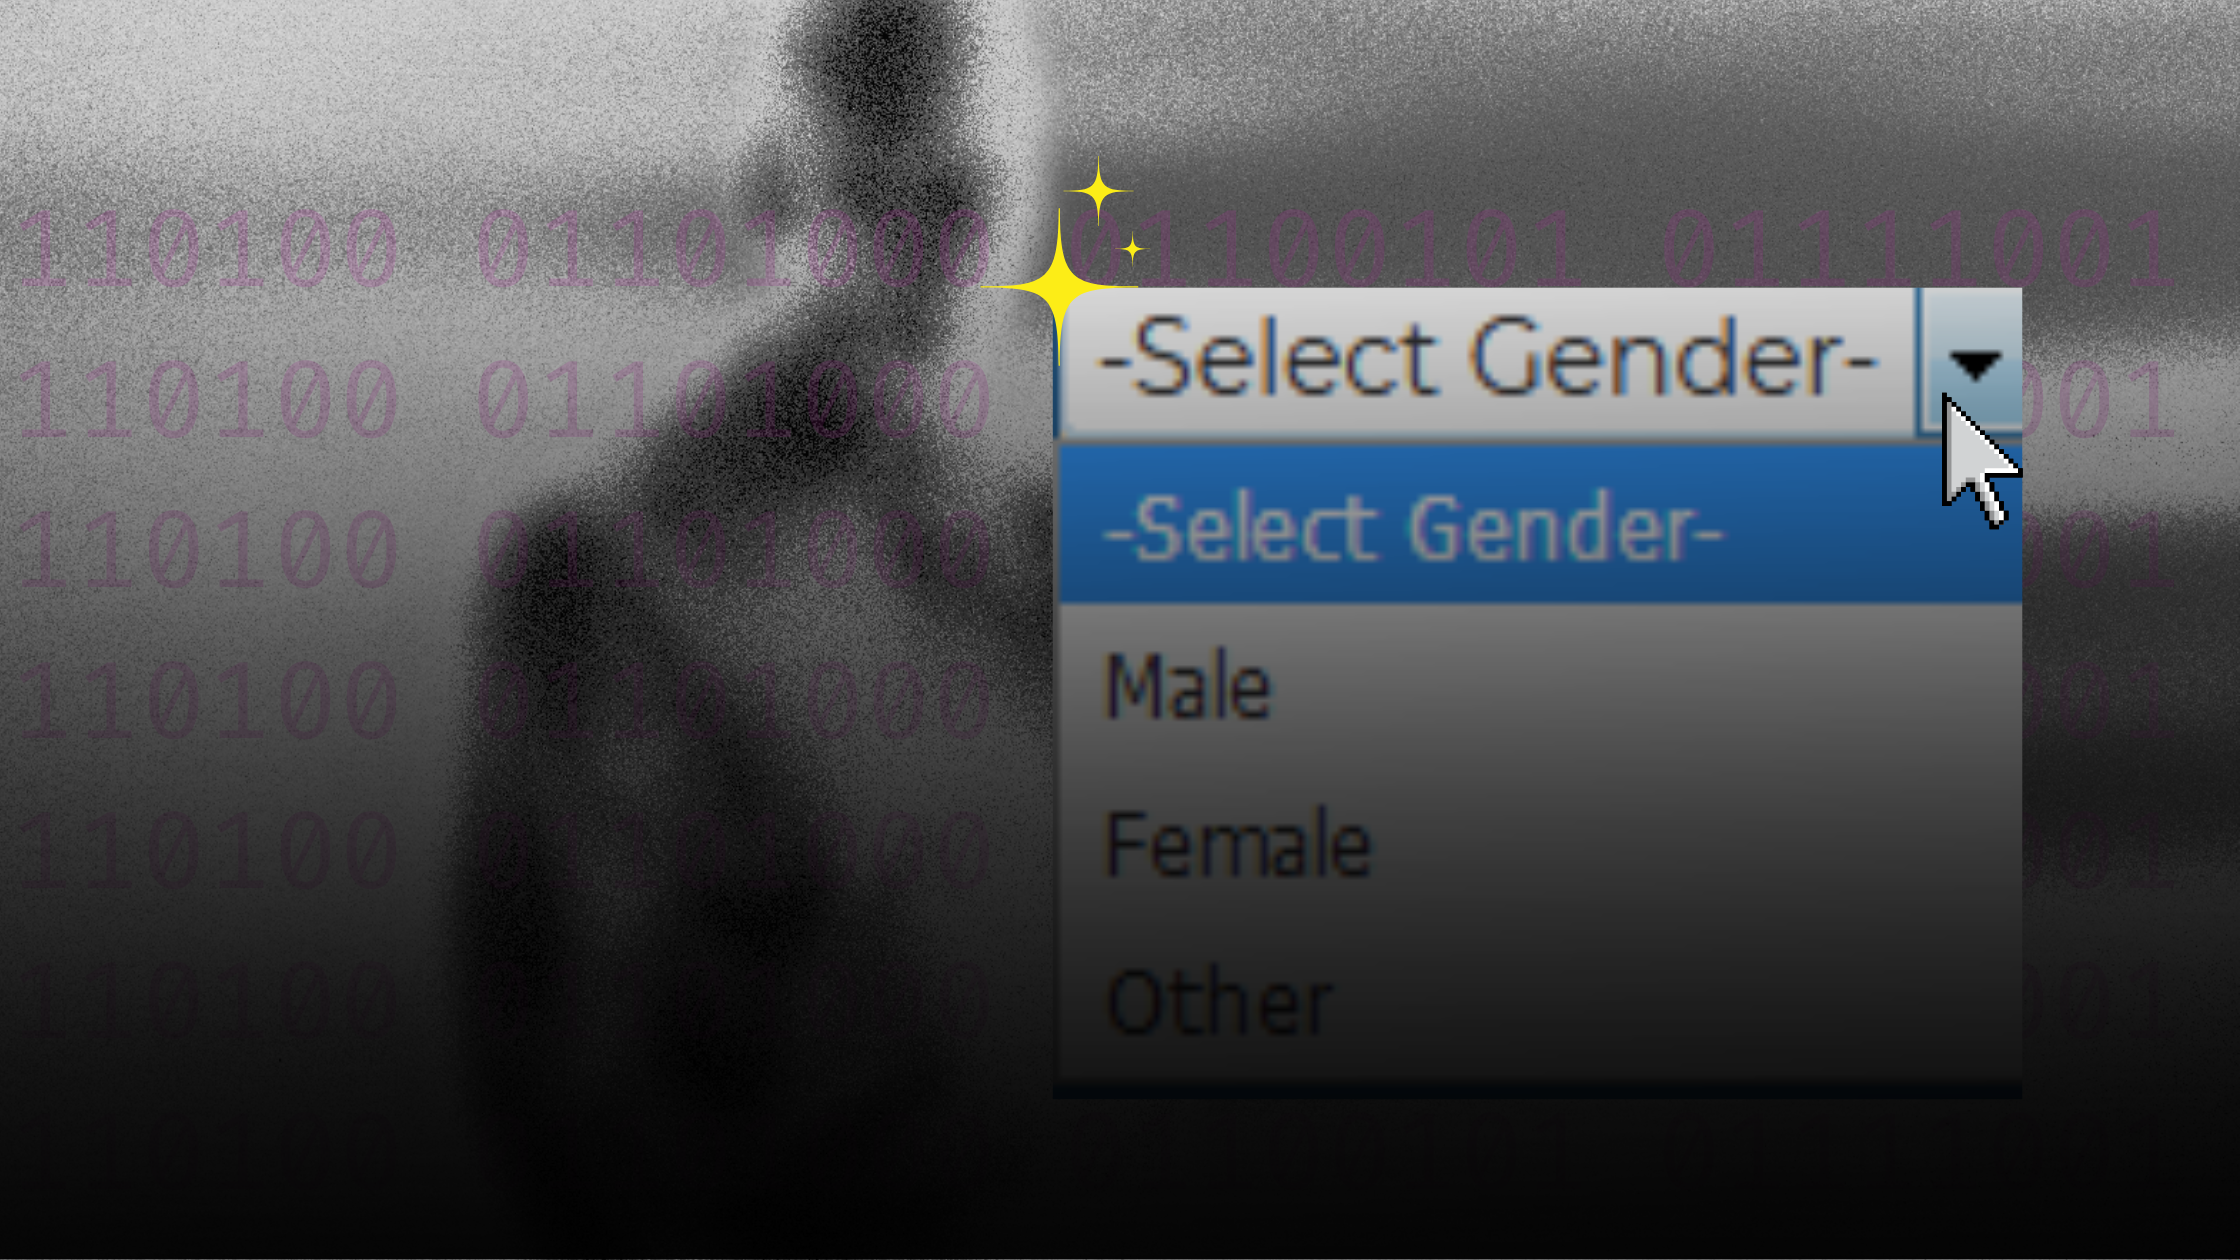 More than Other: Non-Binary in Binary Code